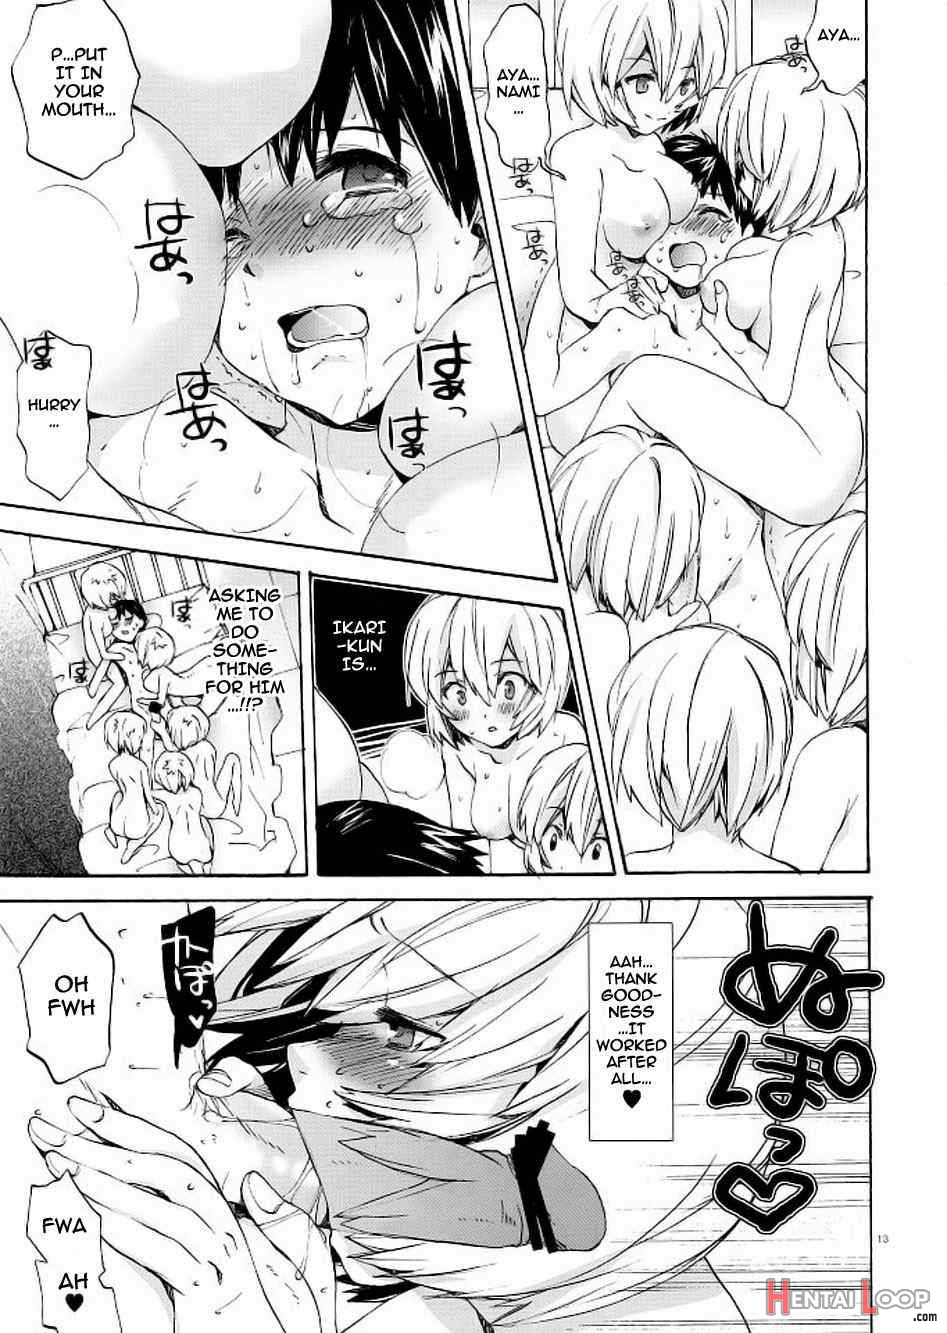 Ayanami House he Youkoso page 10